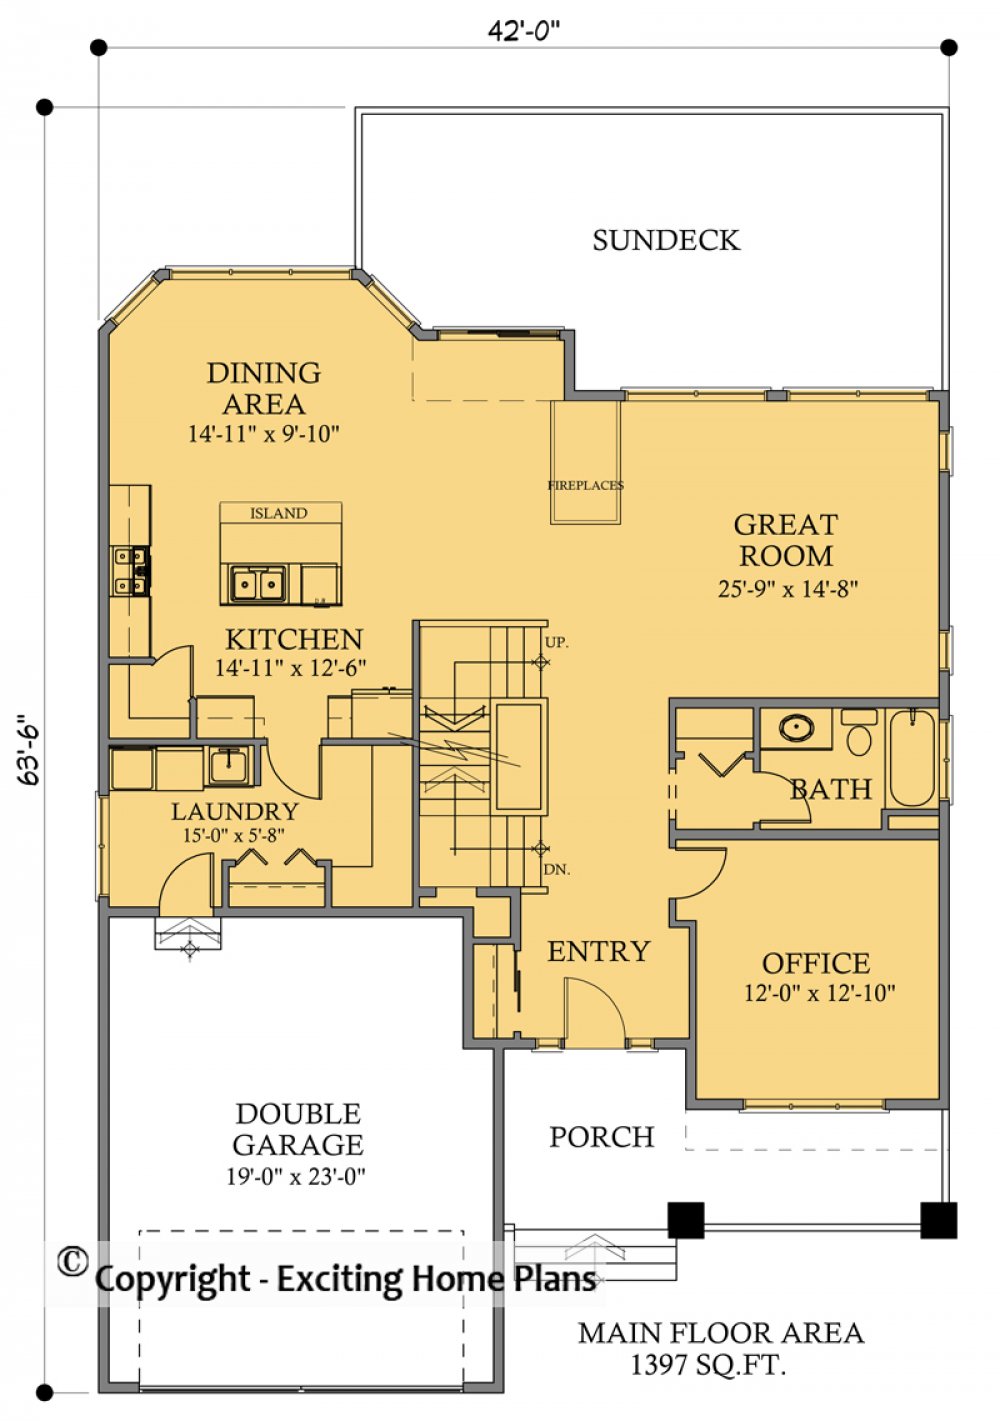 House Plan Information for Madison II